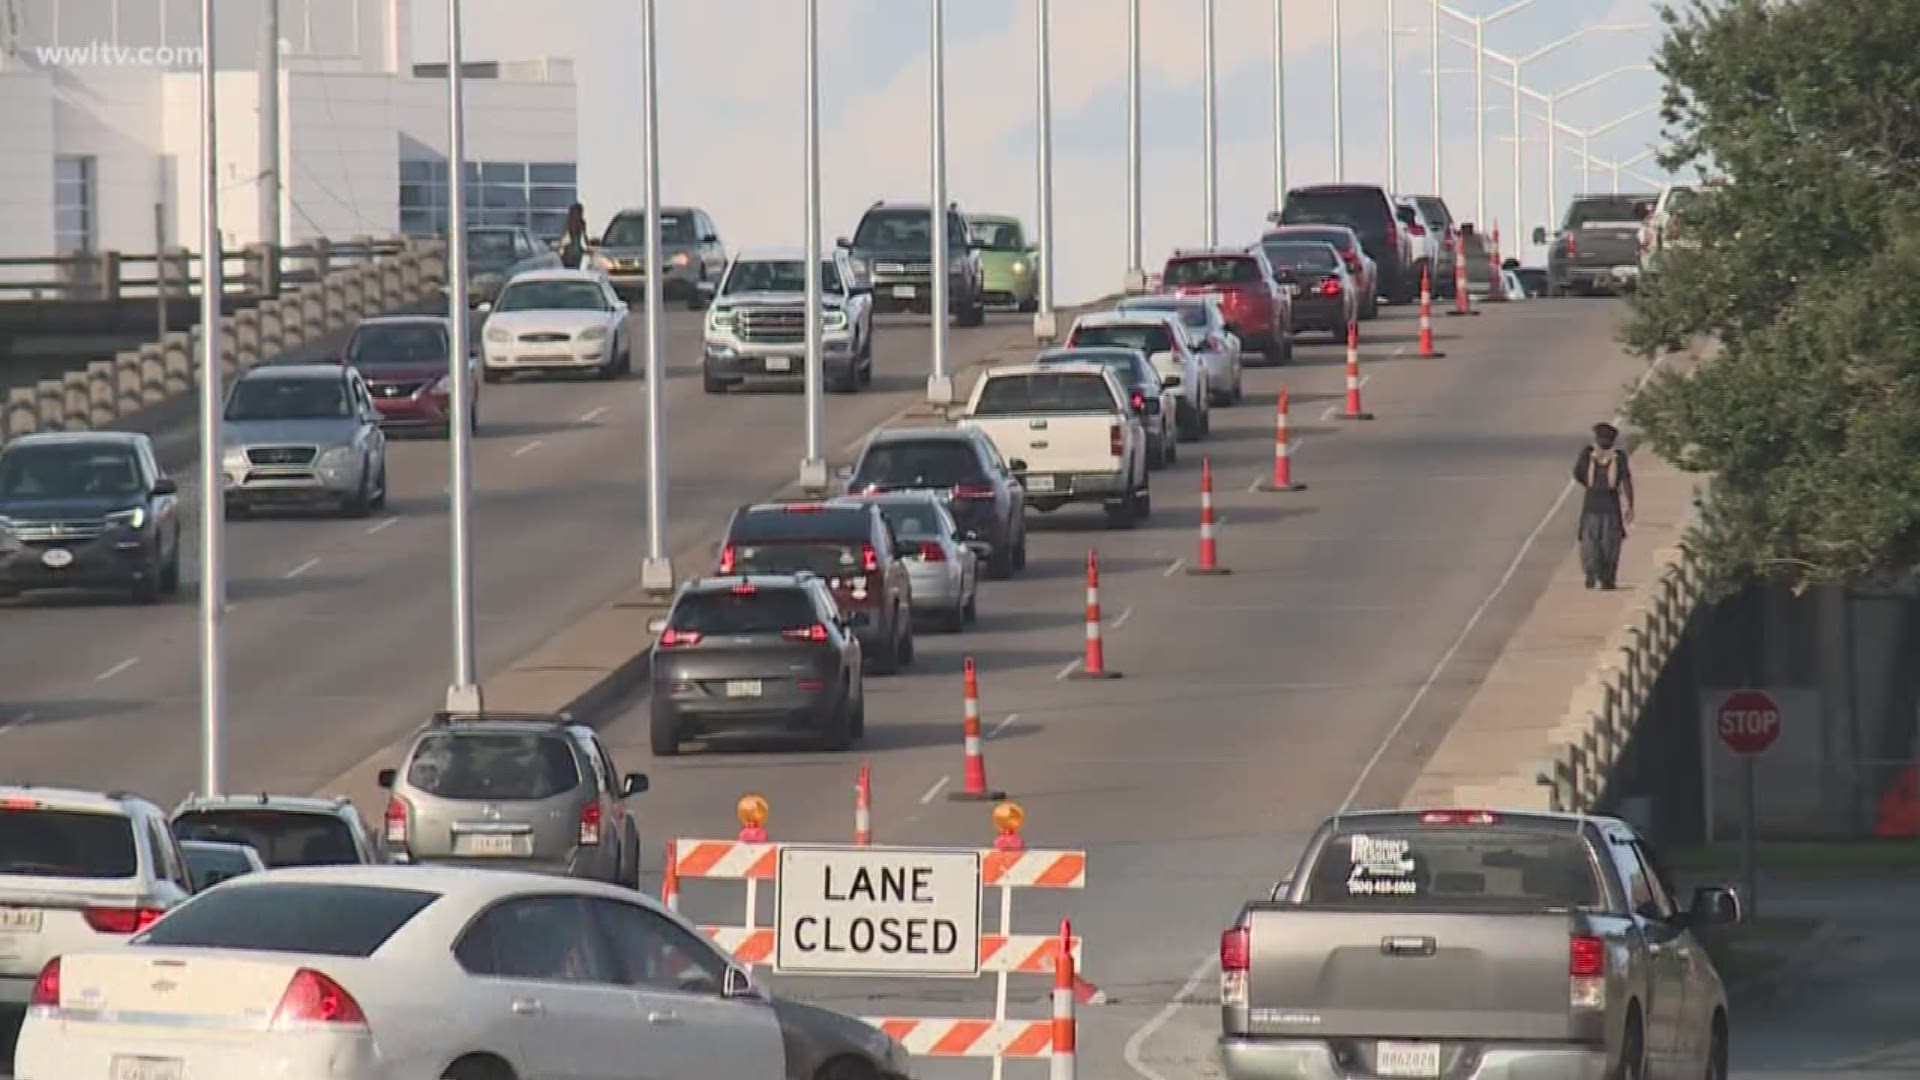 The rehabbing of the bridge will take place over the next five months, and that means a lane reduction to both directions of traffic between Erato and Tulane.